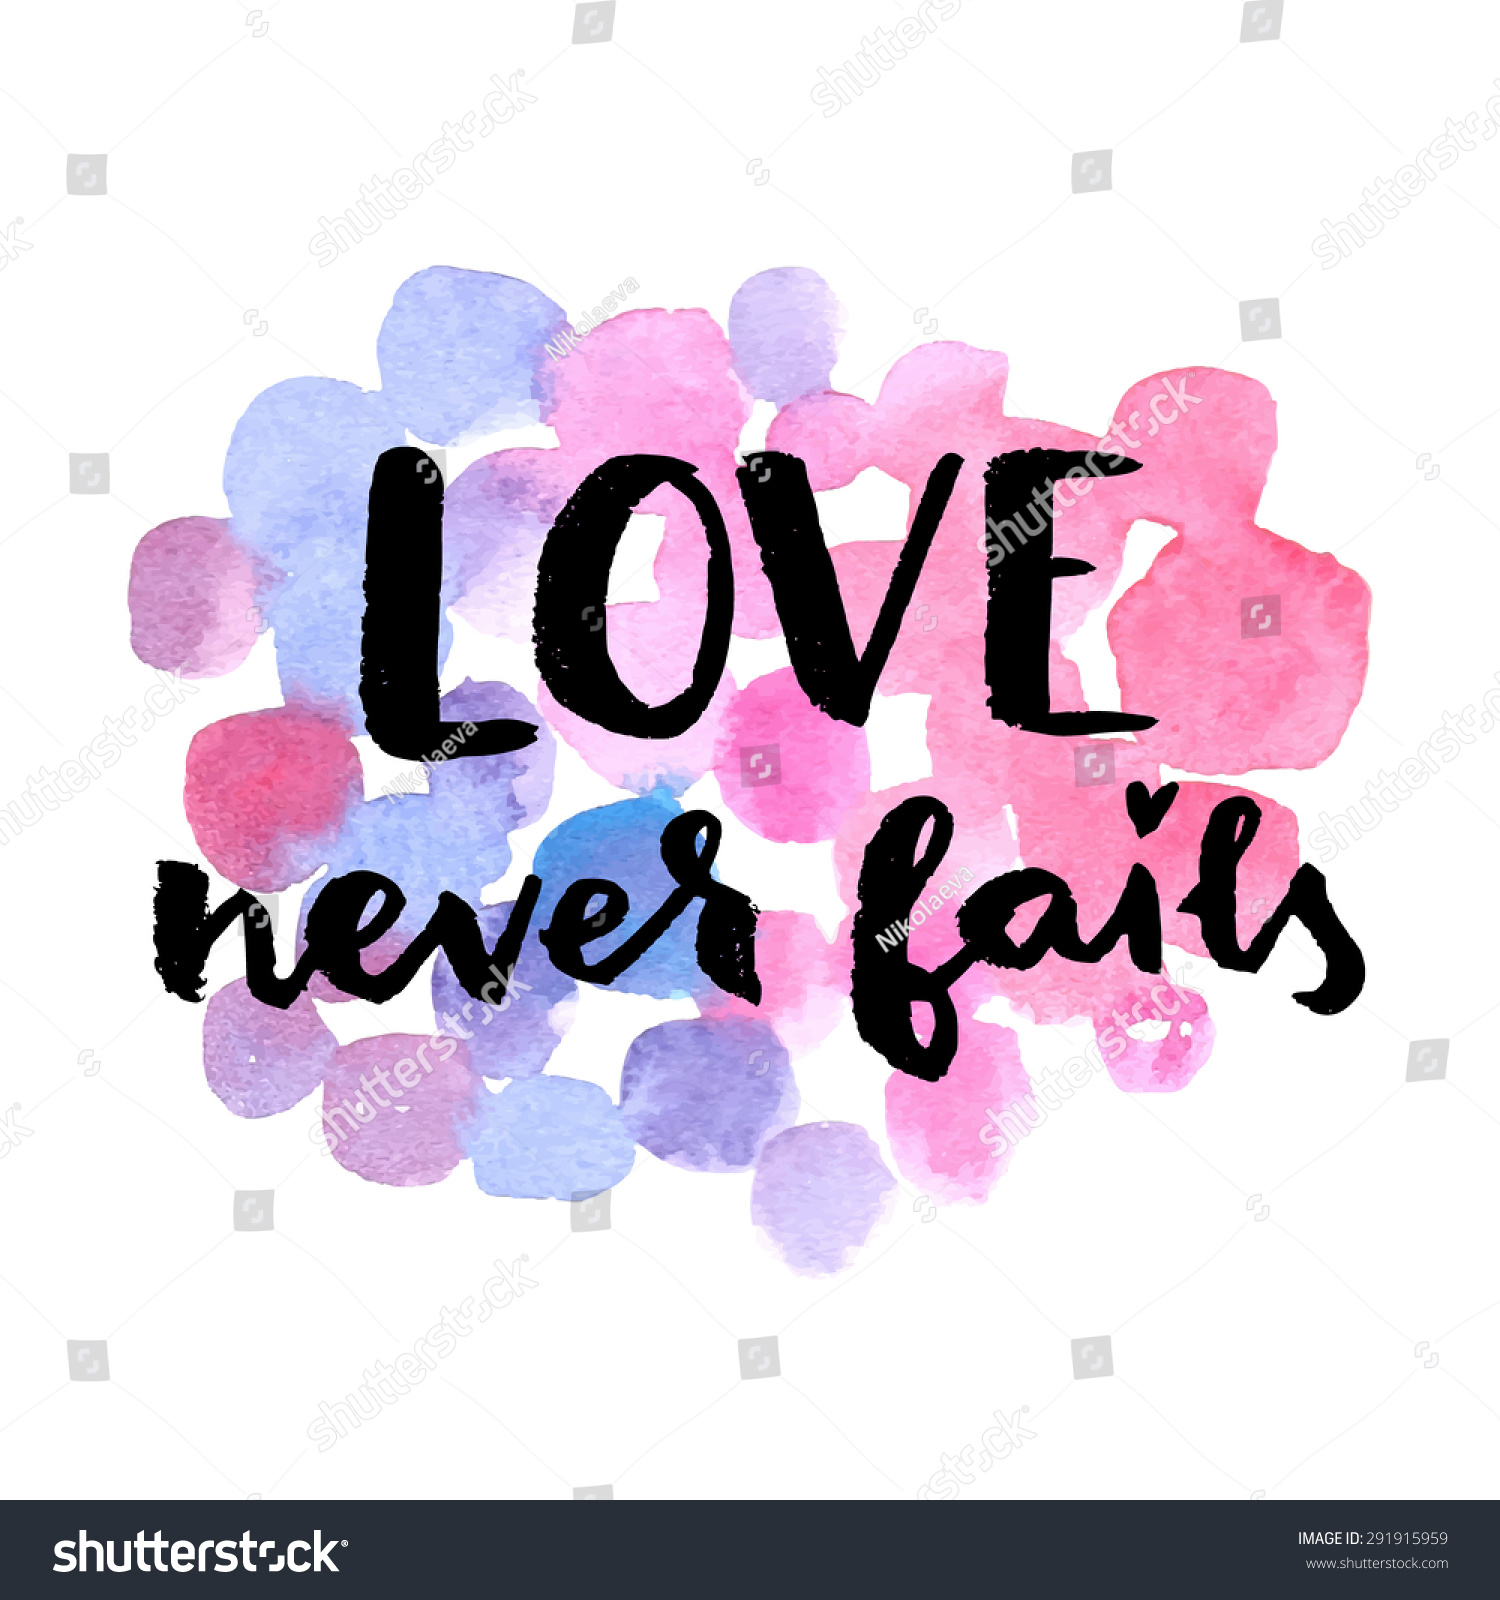 Love Never Fails. Hand Drawn Calligraphic Quote On A Watercolor ...